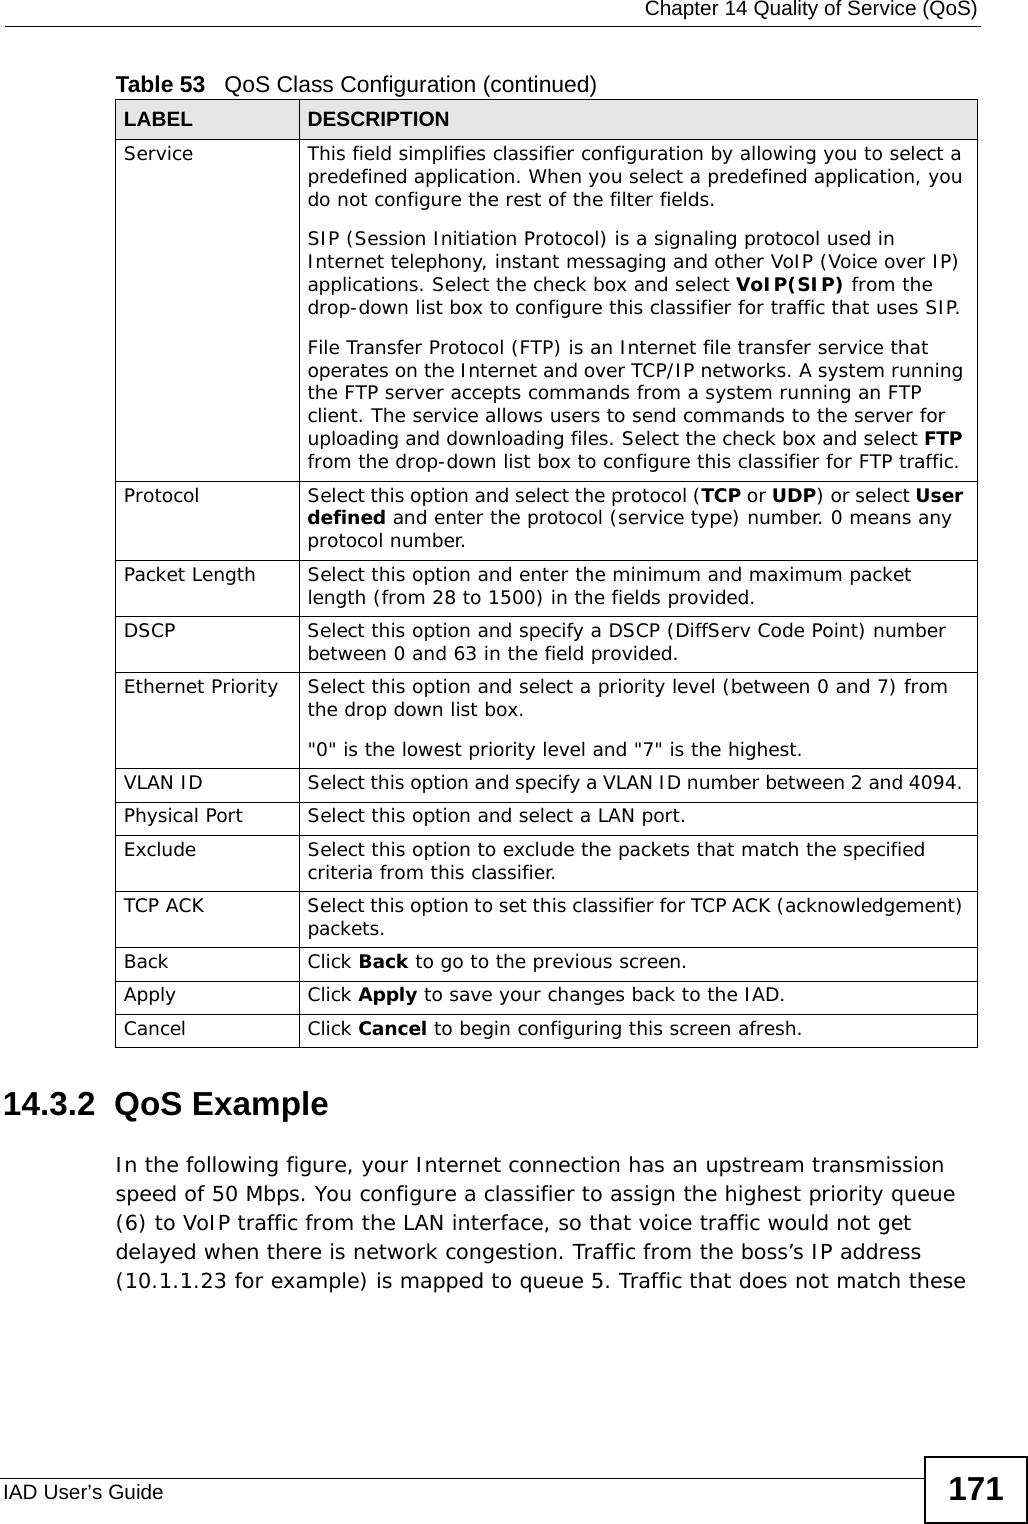  Chapter 14 Quality of Service (QoS)IAD User’s Guide 17114.3.2  QoS ExampleIn the following figure, your Internet connection has an upstream transmission speed of 50 Mbps. You configure a classifier to assign the highest priority queue (6) to VoIP traffic from the LAN interface, so that voice traffic would not get delayed when there is network congestion. Traffic from the boss’s IP address (10.1.1.23 for example) is mapped to queue 5. Traffic that does not match these Service This field simplifies classifier configuration by allowing you to select a predefined application. When you select a predefined application, you do not configure the rest of the filter fields.SIP (Session Initiation Protocol) is a signaling protocol used in Internet telephony, instant messaging and other VoIP (Voice over IP) applications. Select the check box and select VoIP(SIP) from the drop-down list box to configure this classifier for traffic that uses SIP. File Transfer Protocol (FTP) is an Internet file transfer service that operates on the Internet and over TCP/IP networks. A system running the FTP server accepts commands from a system running an FTP client. The service allows users to send commands to the server for uploading and downloading files. Select the check box and select FTP from the drop-down list box to configure this classifier for FTP traffic. Protocol Select this option and select the protocol (TCP or UDP) or select User defined and enter the protocol (service type) number. 0 means any protocol number.Packet Length Select this option and enter the minimum and maximum packet length (from 28 to 1500) in the fields provided.DSCP Select this option and specify a DSCP (DiffServ Code Point) number between 0 and 63 in the field provided.Ethernet Priority Select this option and select a priority level (between 0 and 7) from the drop down list box.&quot;0&quot; is the lowest priority level and &quot;7&quot; is the highest.VLAN ID Select this option and specify a VLAN ID number between 2 and 4094. Physical Port  Select this option and select a LAN port.Exclude  Select this option to exclude the packets that match the specified criteria from this classifier.TCP ACK Select this option to set this classifier for TCP ACK (acknowledgement) packets.Back Click Back to go to the previous screen.Apply Click Apply to save your changes back to the IAD.Cancel Click Cancel to begin configuring this screen afresh.Table 53   QoS Class Configuration (continued)LABEL DESCRIPTION